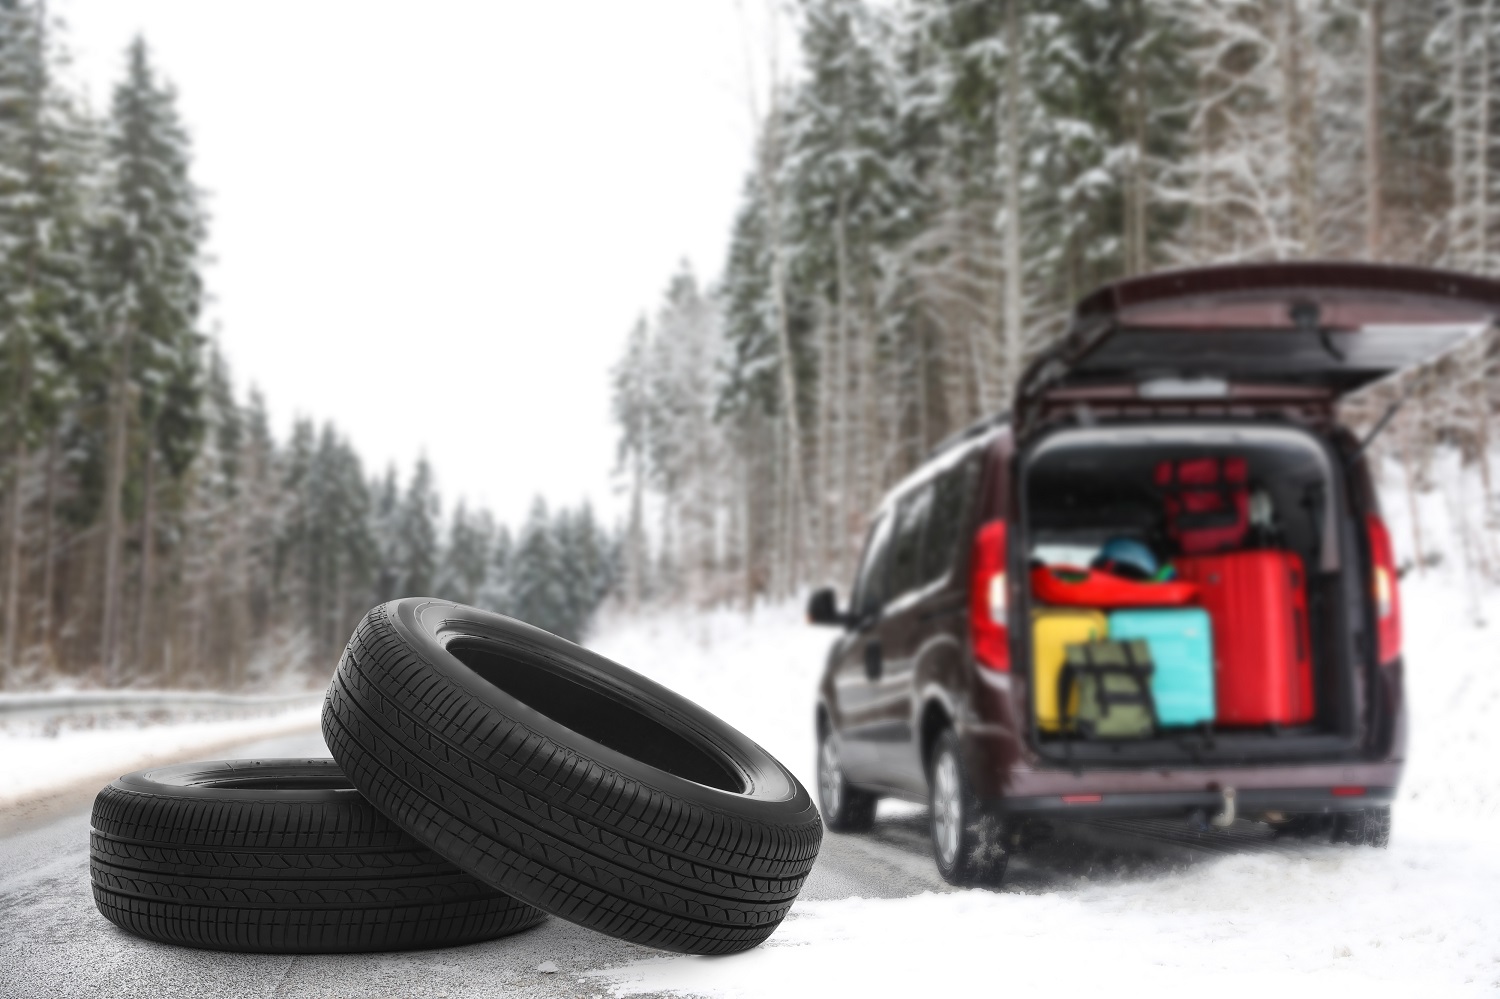 Stay Safe on Winter Roads - winter tires